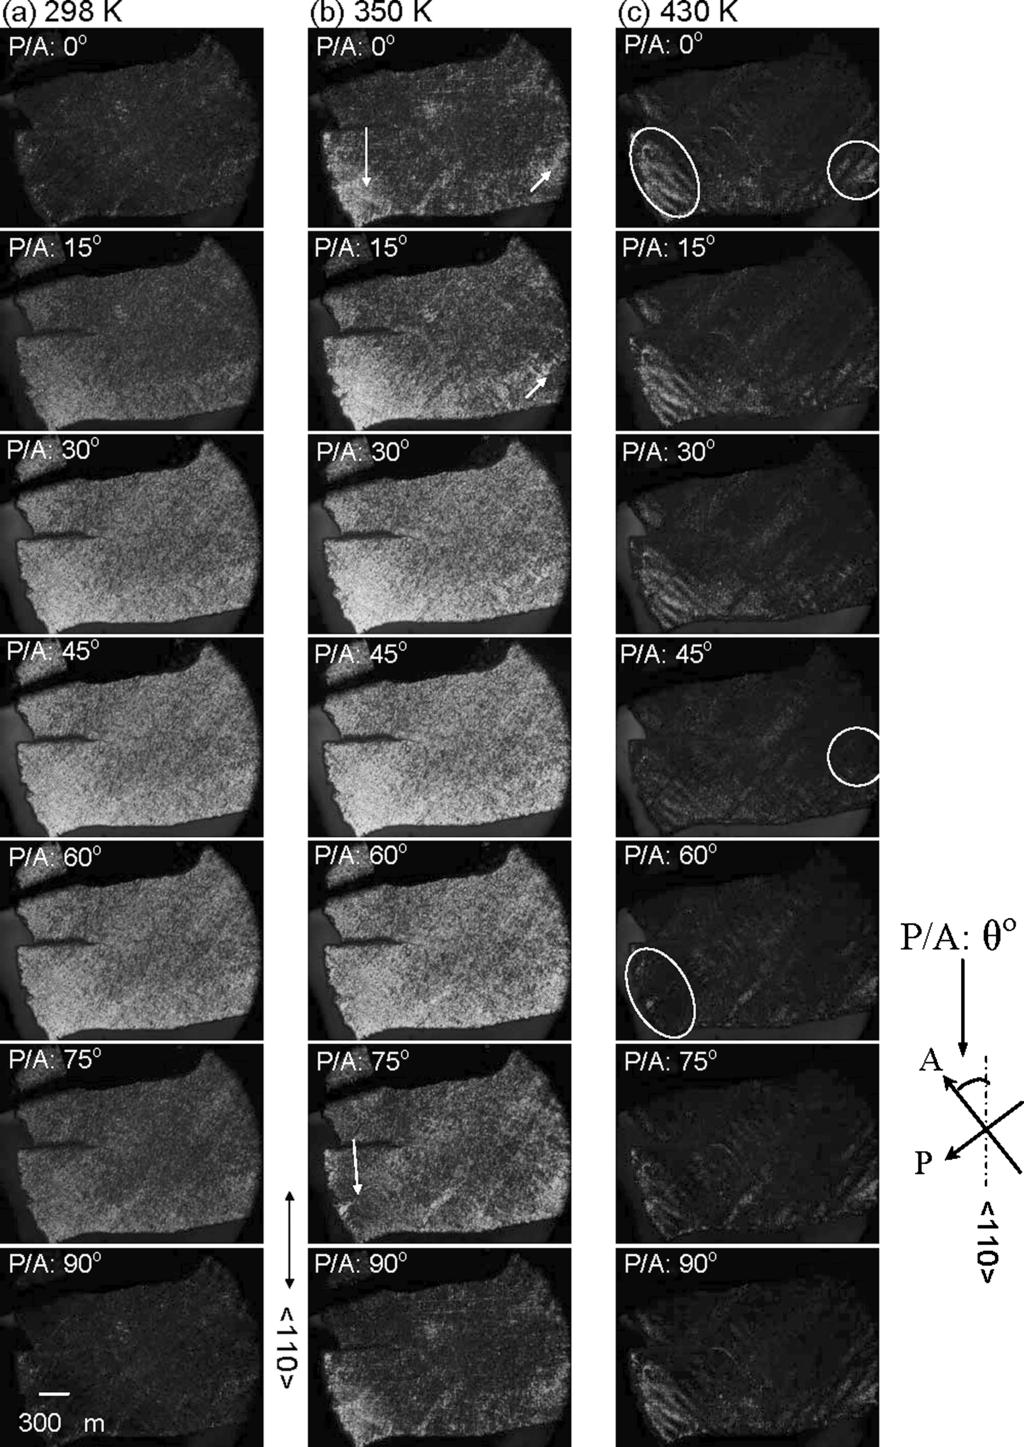 Figure 4. Domain micrographs taken with P/A angles from 0 to 90 at (a) 298 K (RT), (b) 350 K, and (c) 430 K.